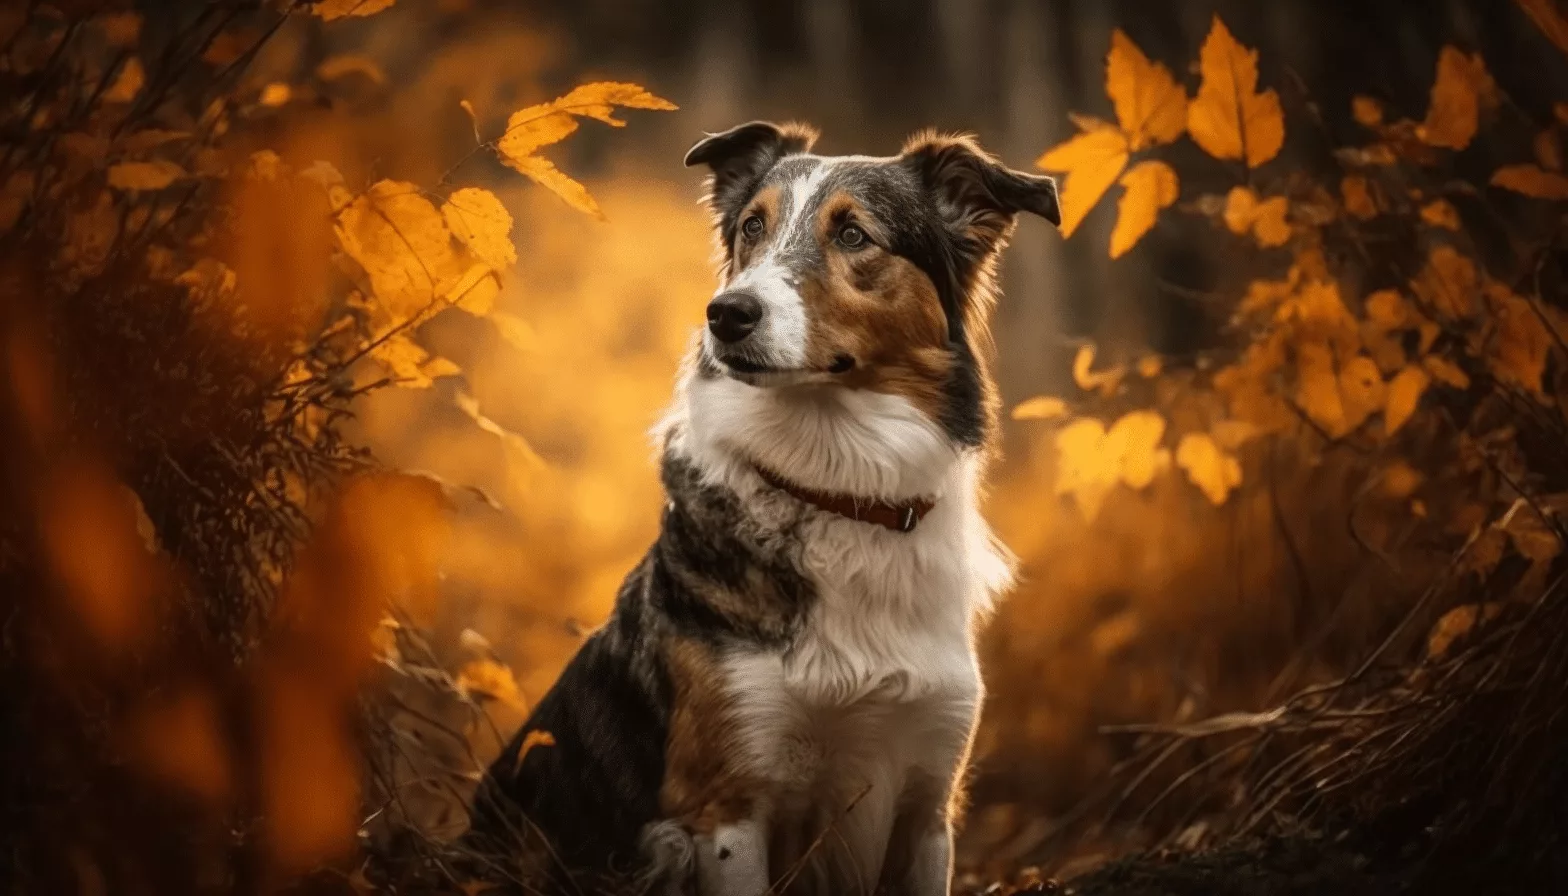 A dog is sitting in a field of autumn leaves.